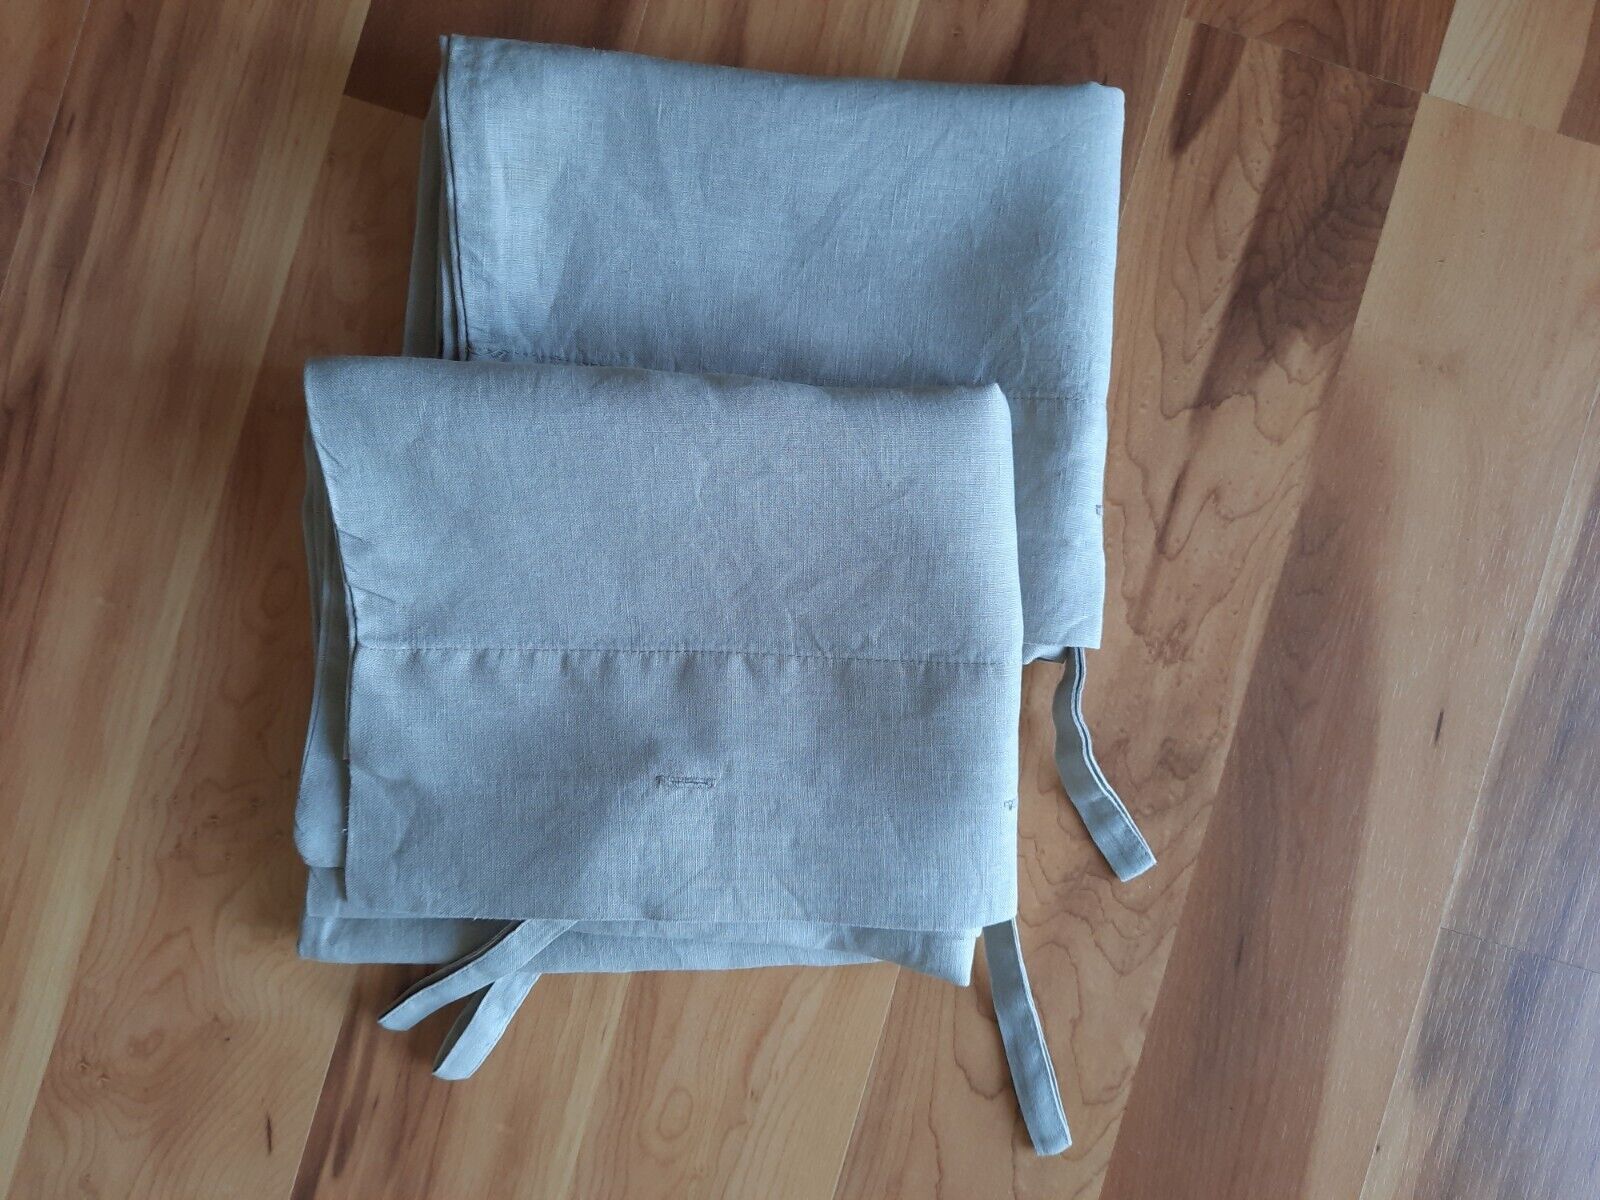 Primary image for Pair of IKEA Linblomma Standard Pillow Shams ~ 100% Linen with Ties